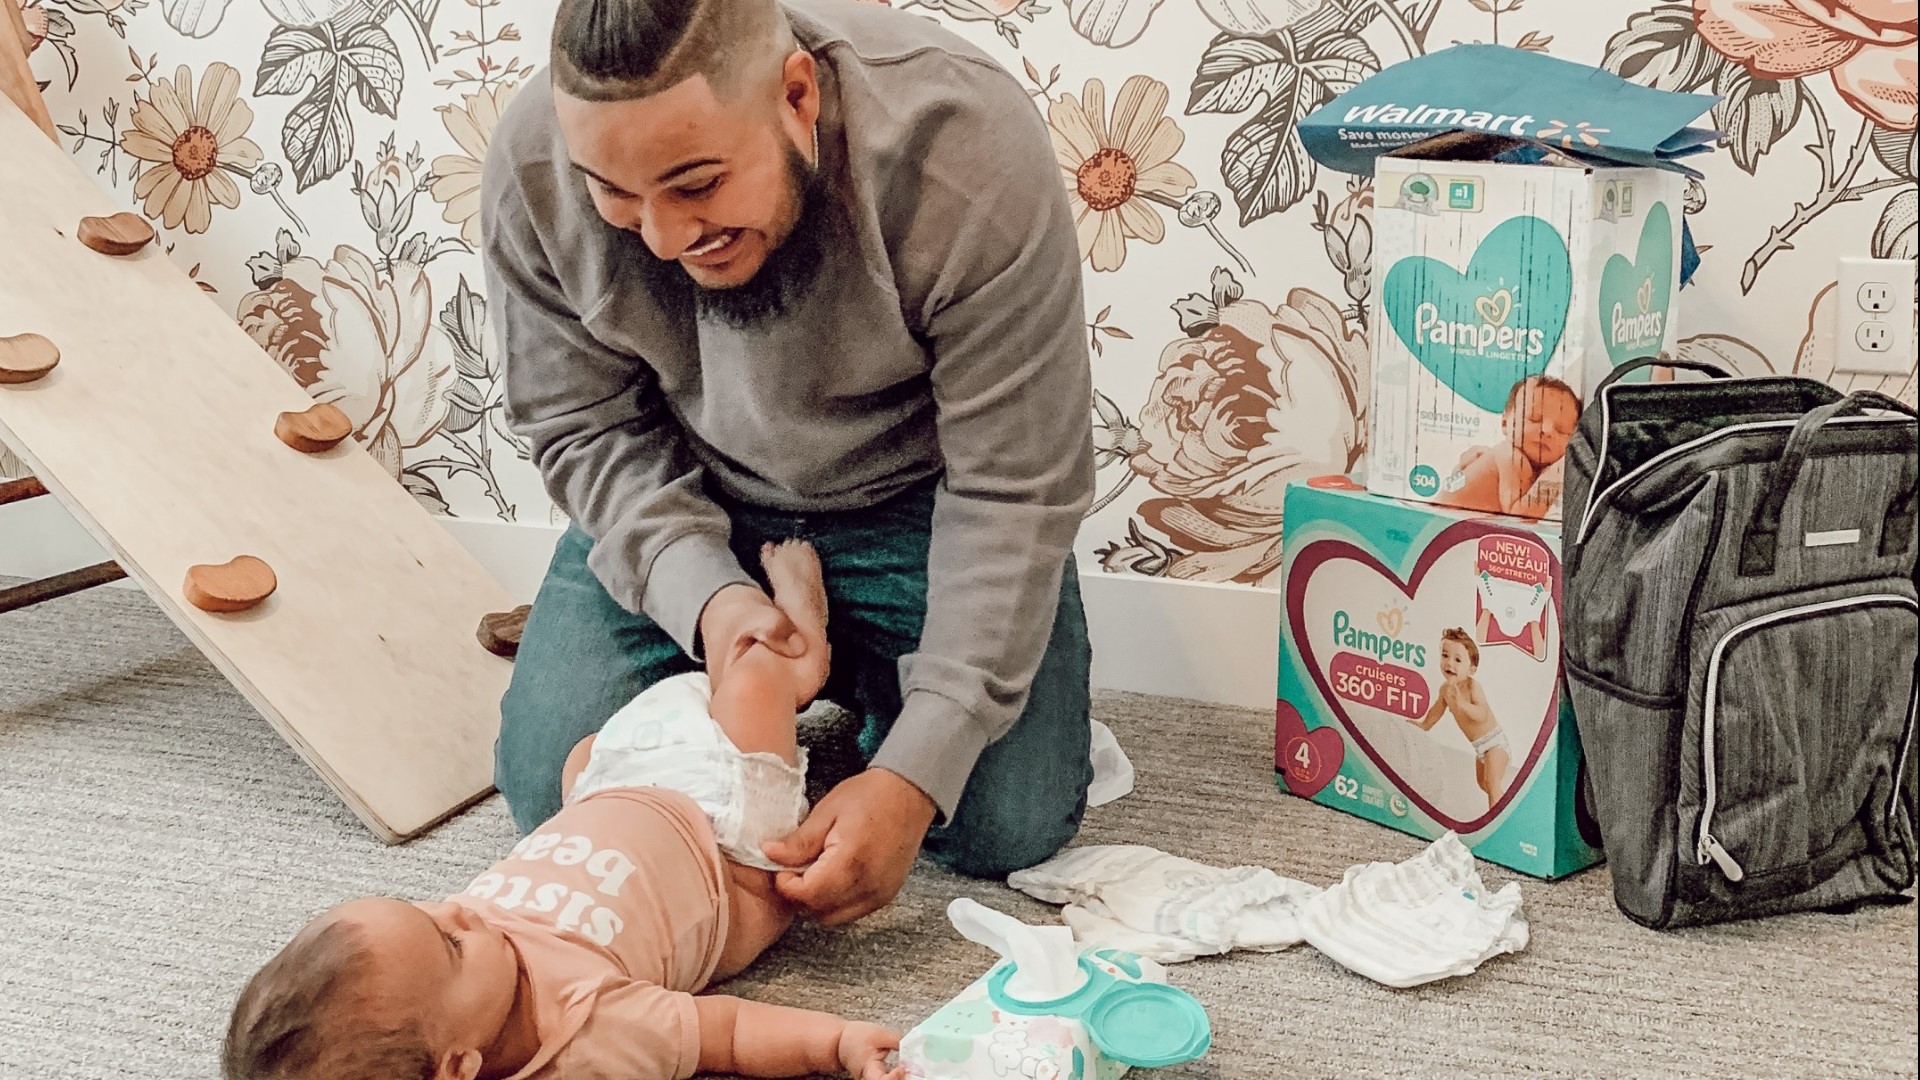 Bloggers Bethanie and Anthony Garcia share their modern-day dad story and how Walmart and Pampers Cruisers 360 Fit are making it easier this Father's Day.